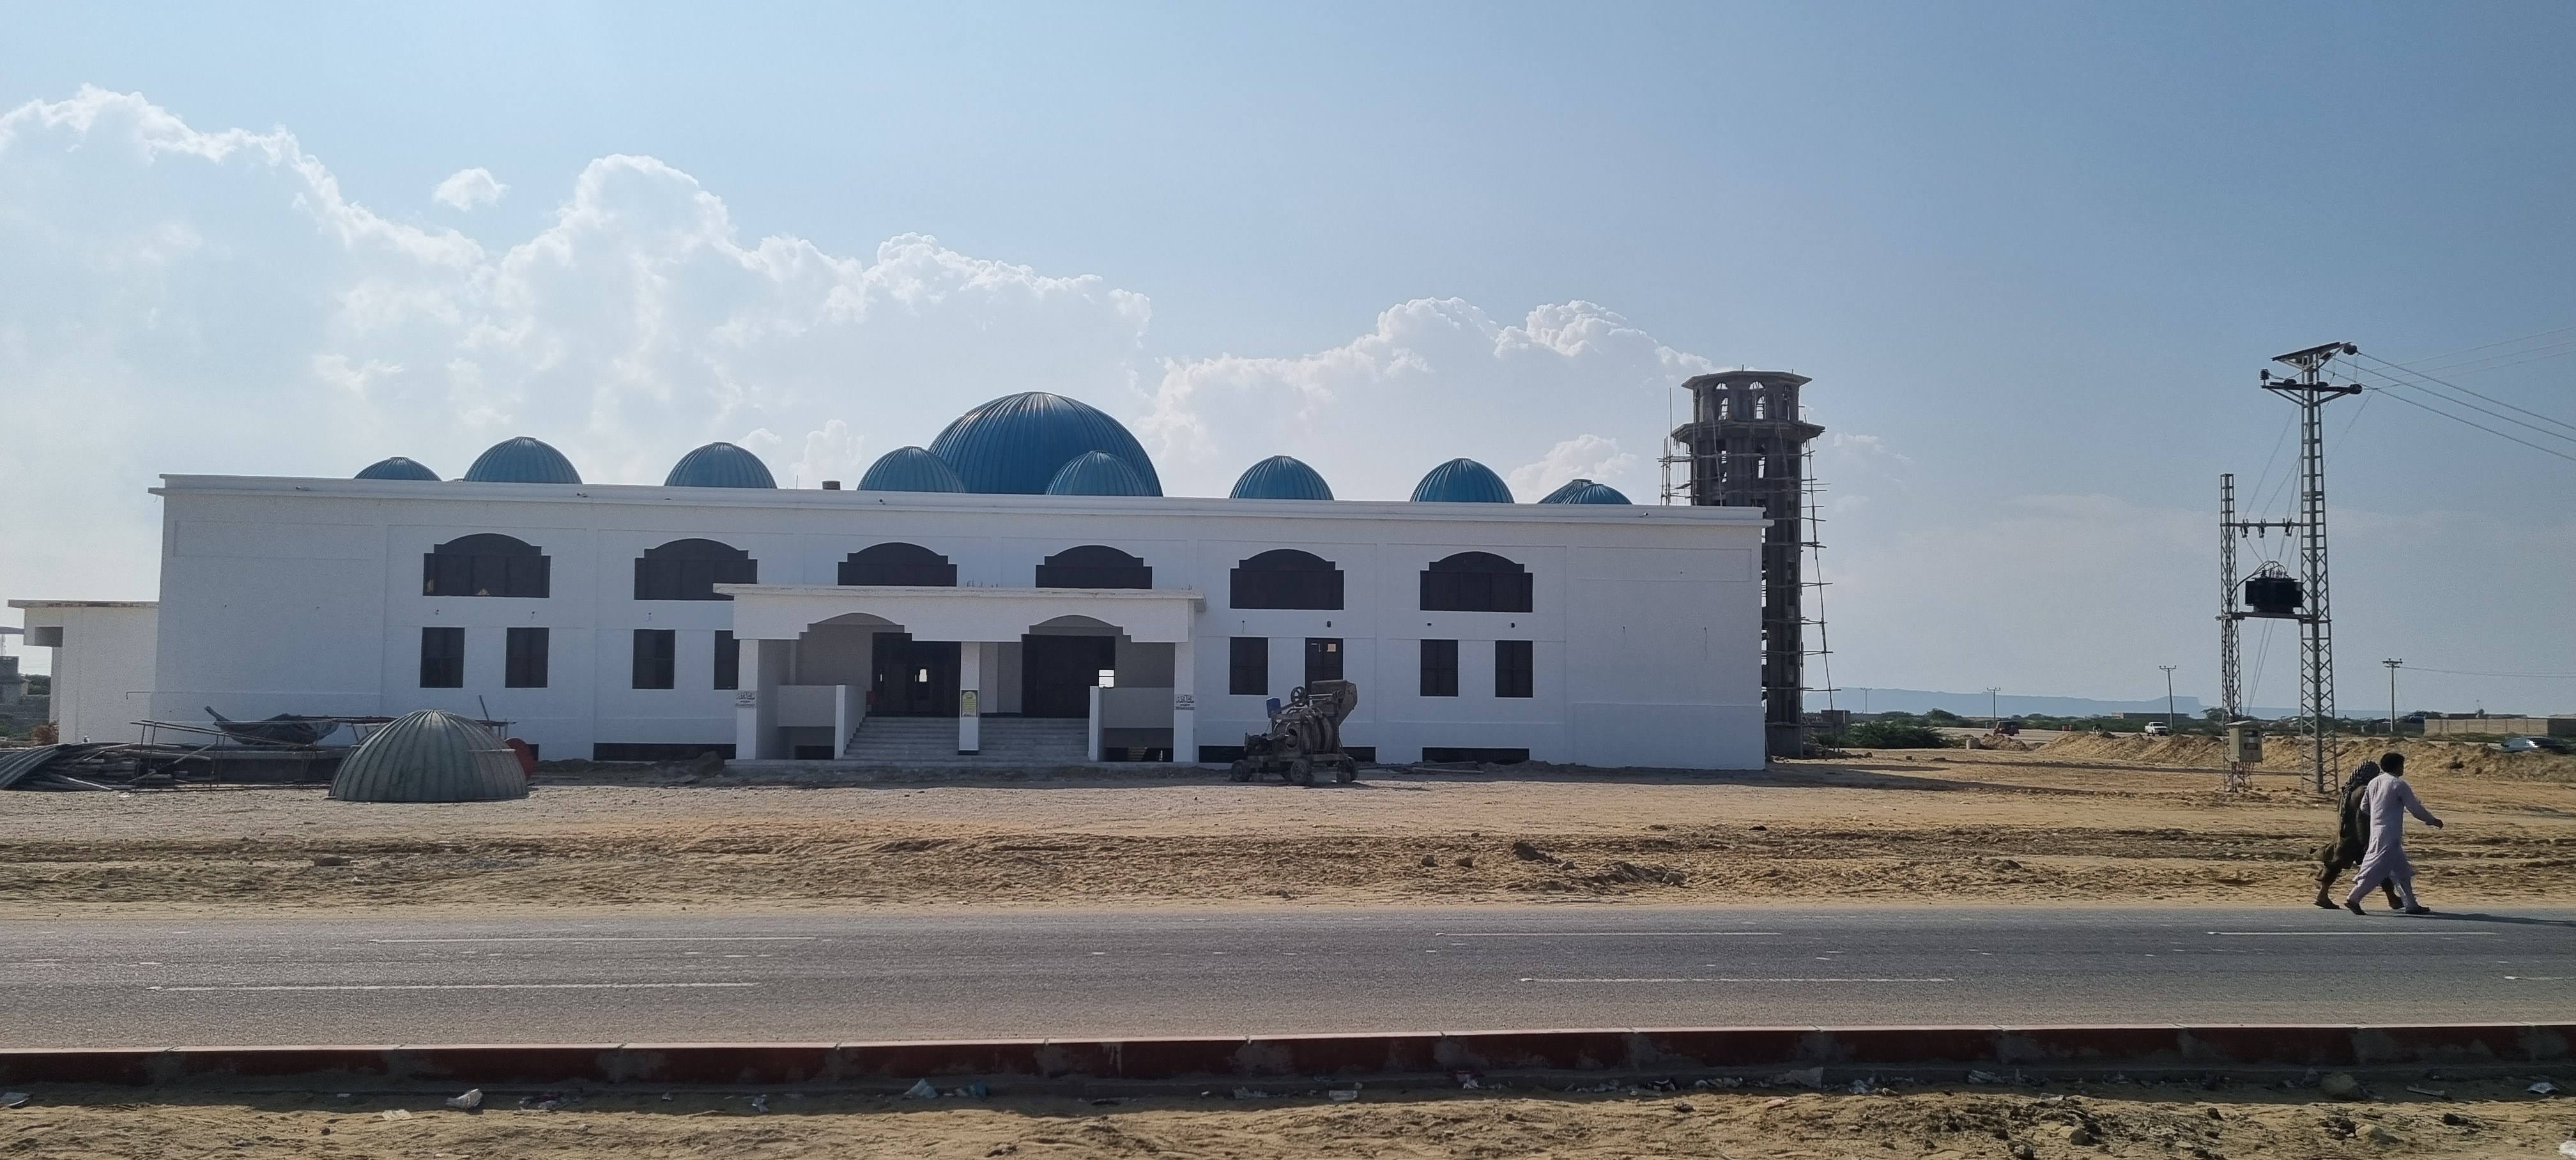 Gwadar welcomes “GDA Grand Mosque” as sole giant mosque